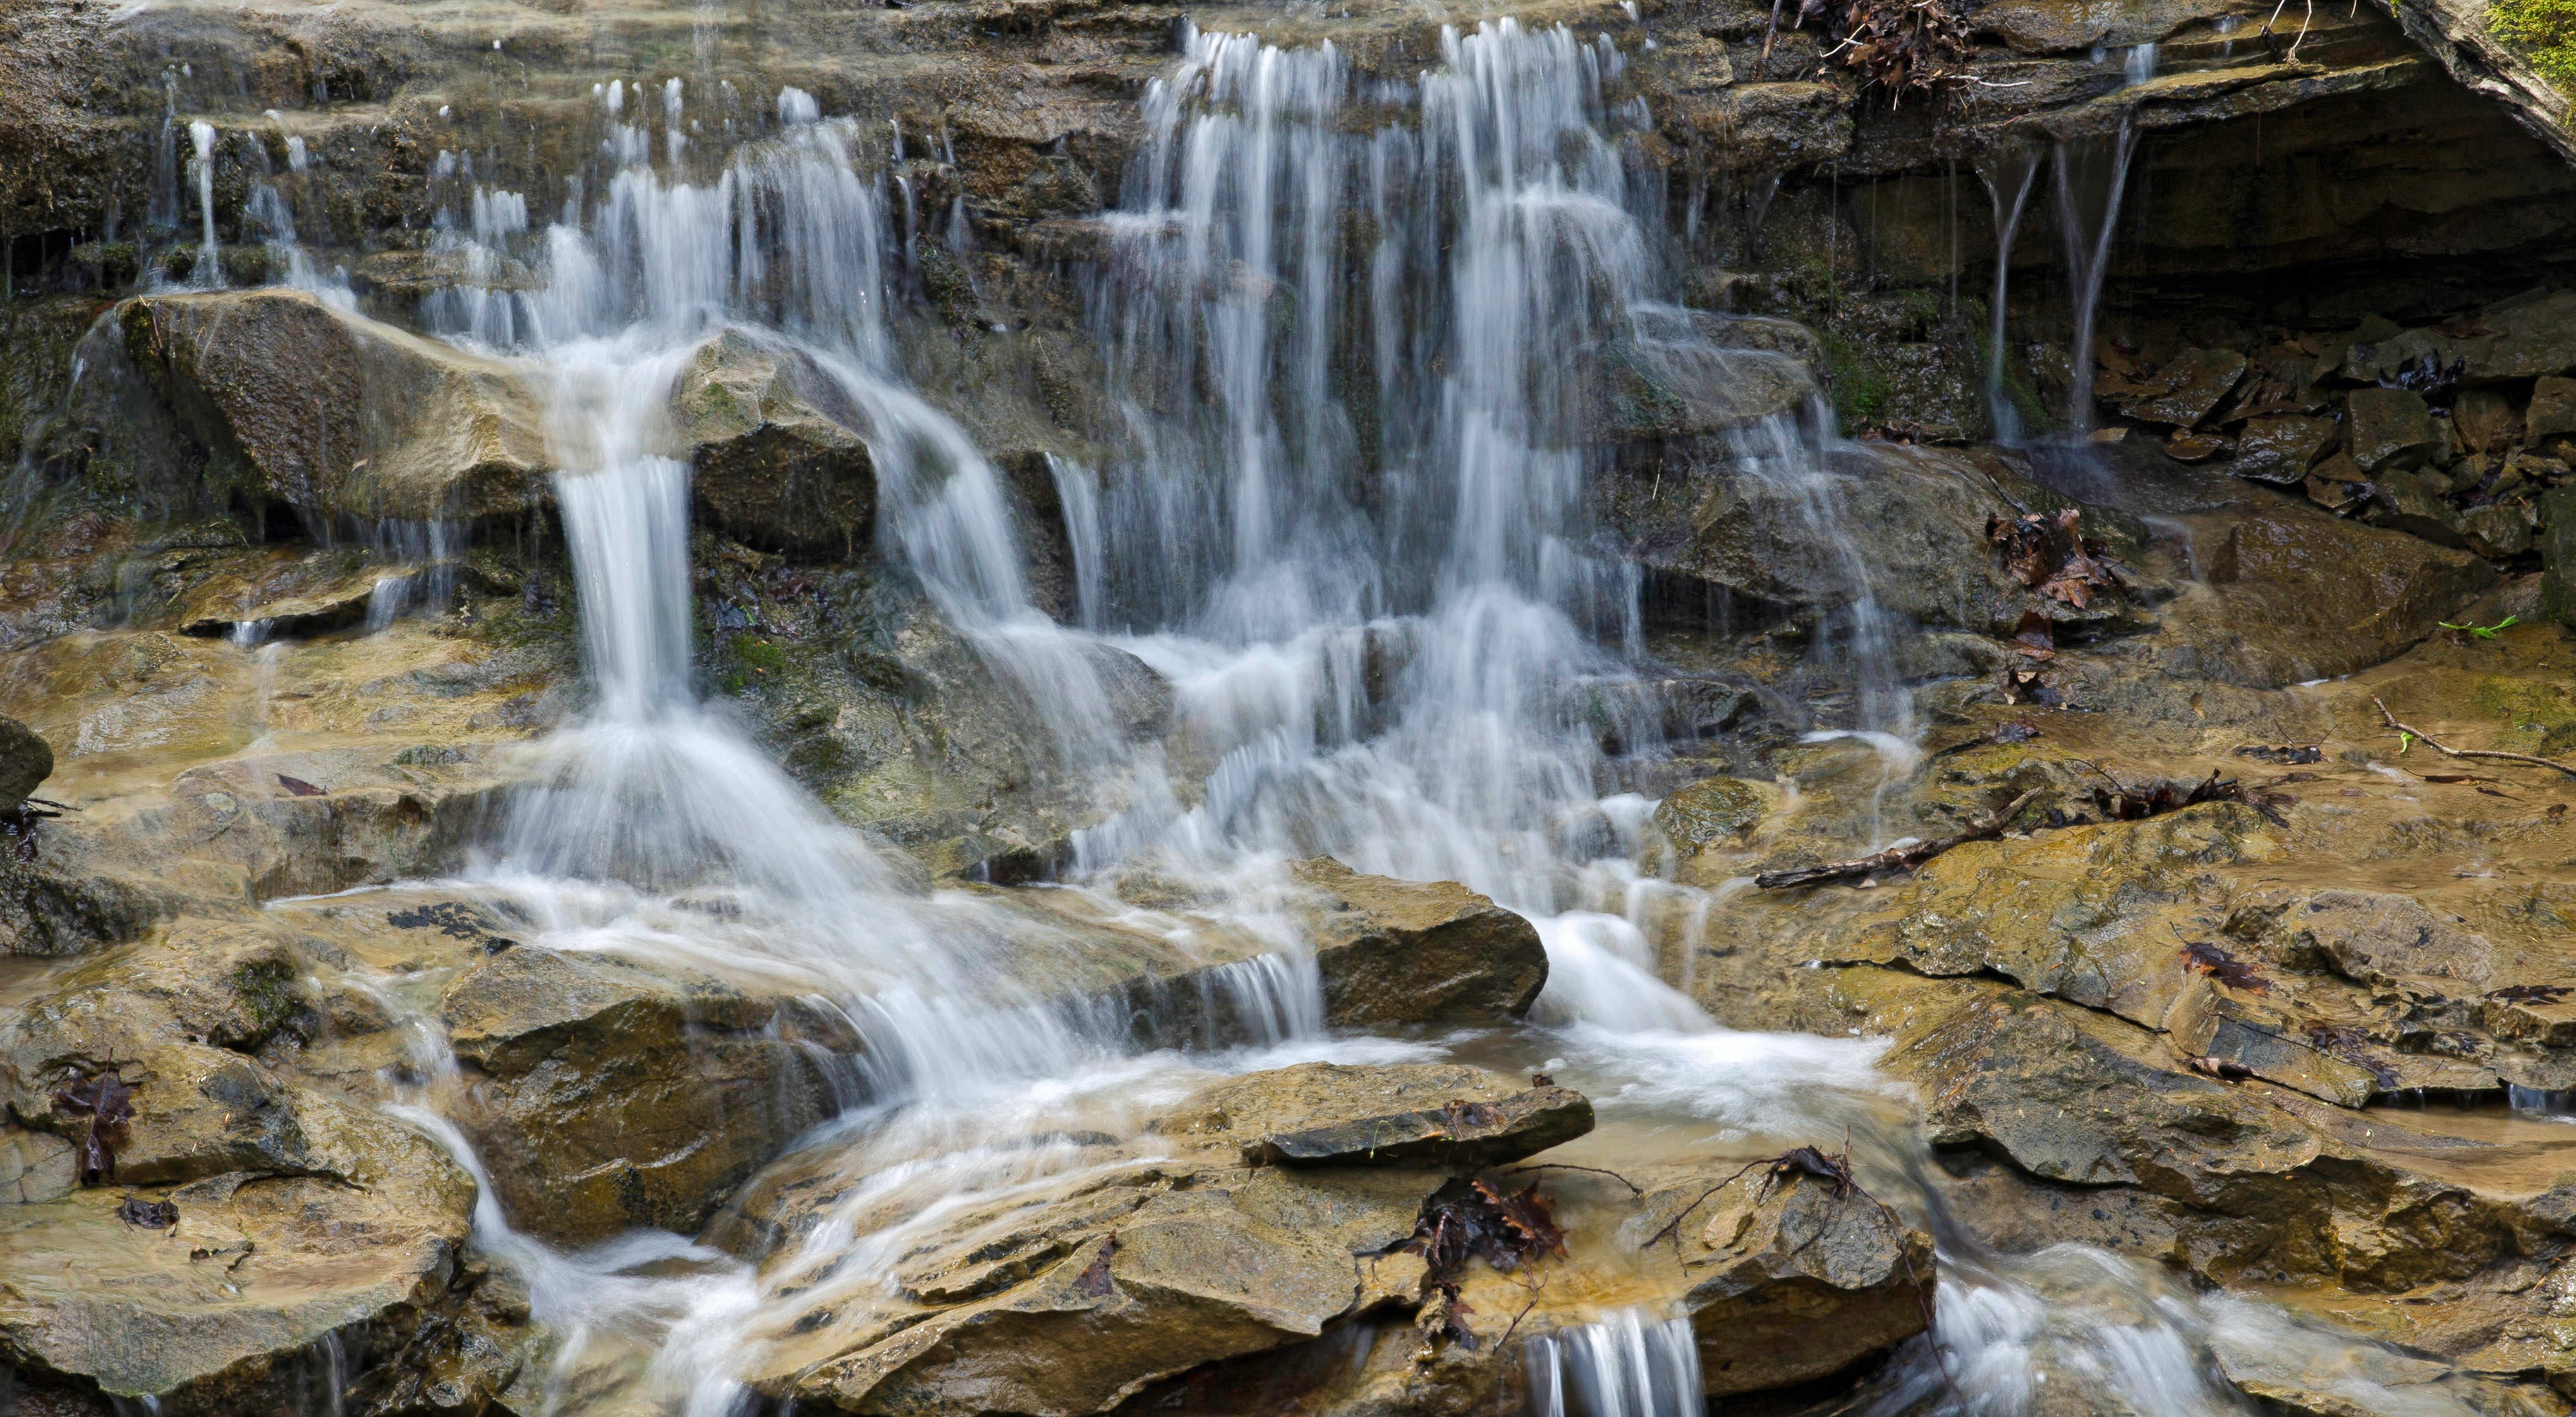 Located along the Wilderness Trail of the Edge of Appalachia Preserve, Ohio.